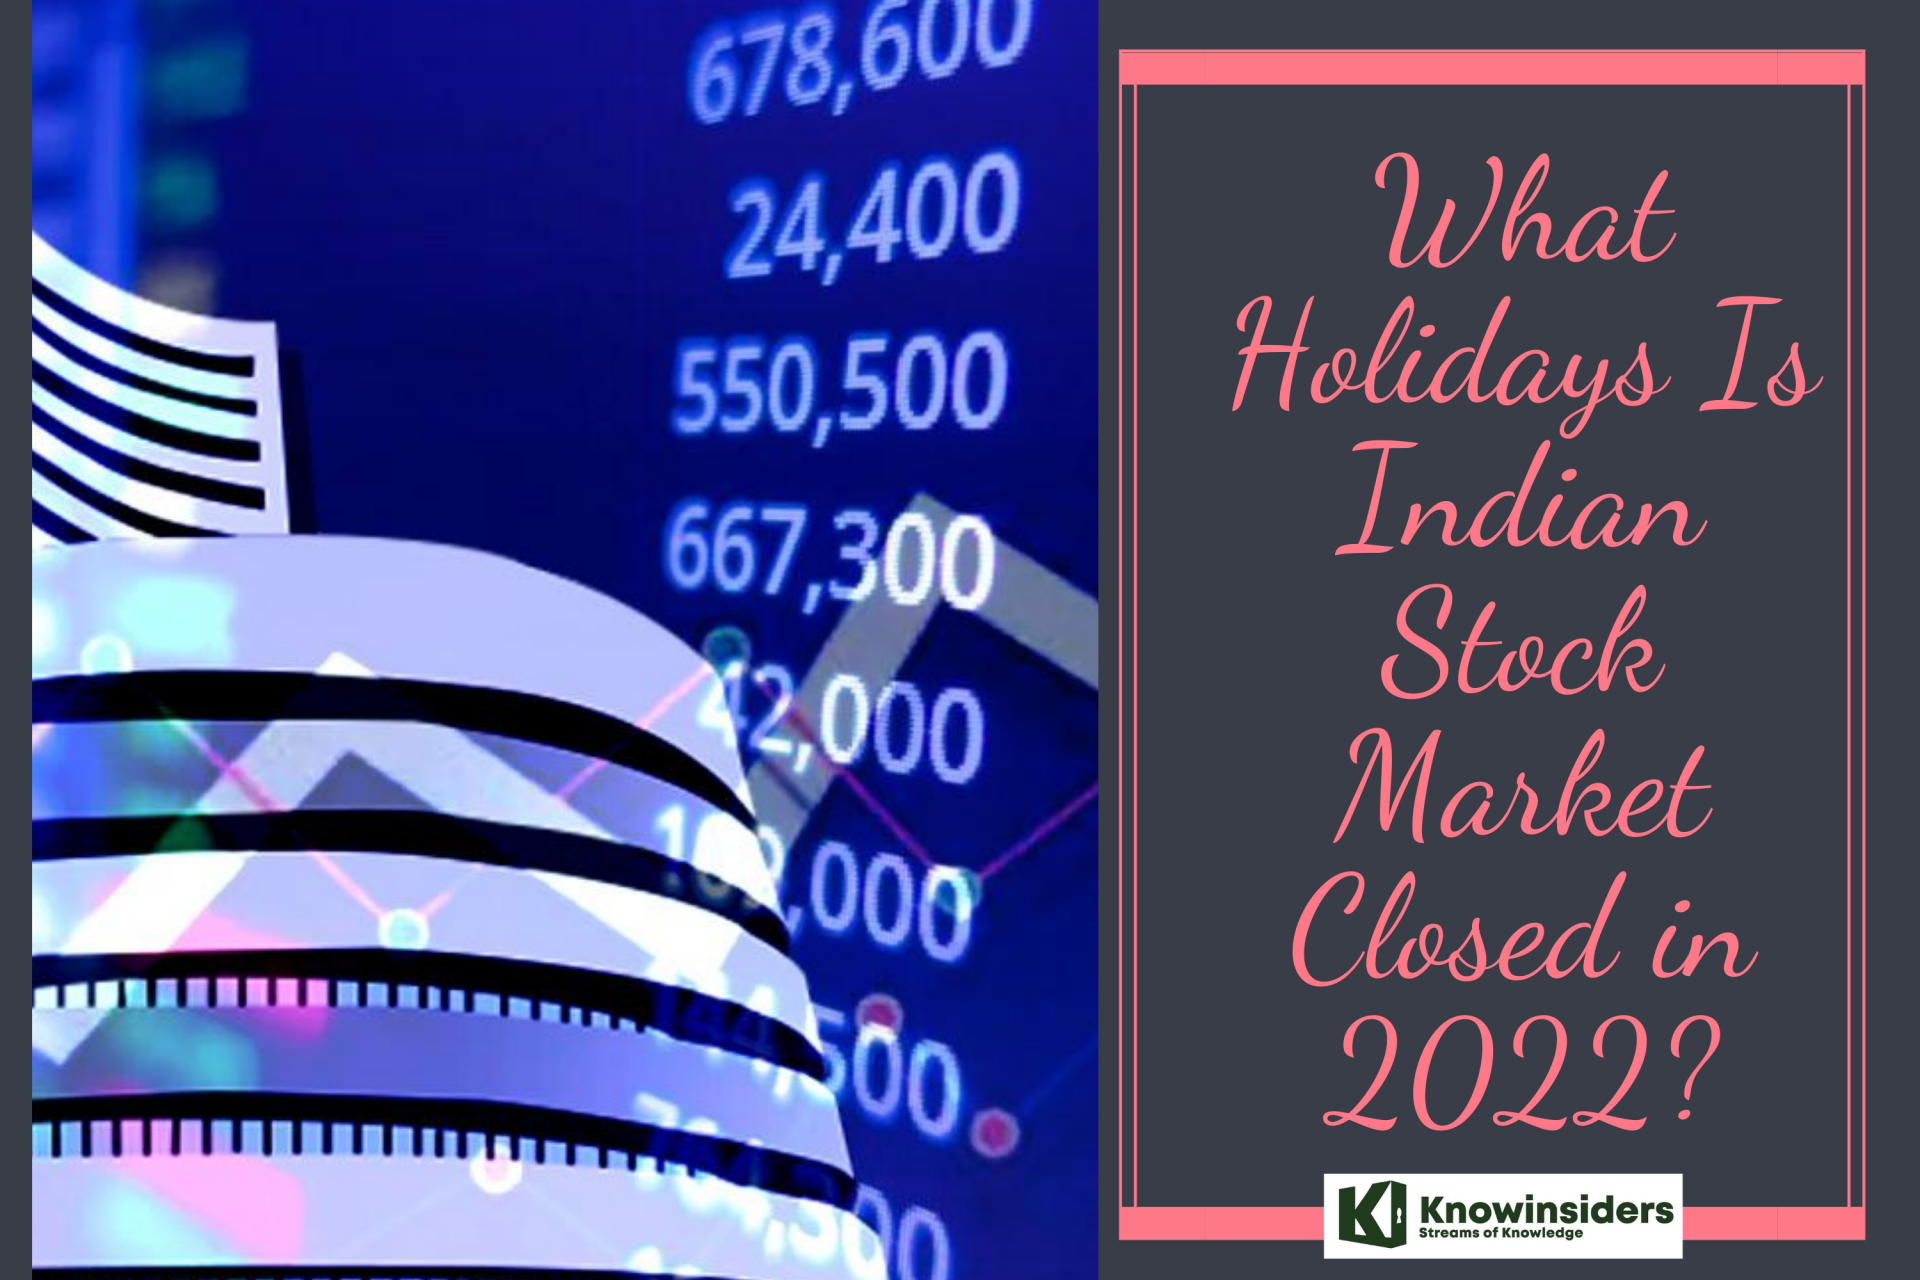 What Holidays are Indian Stock Market Closed